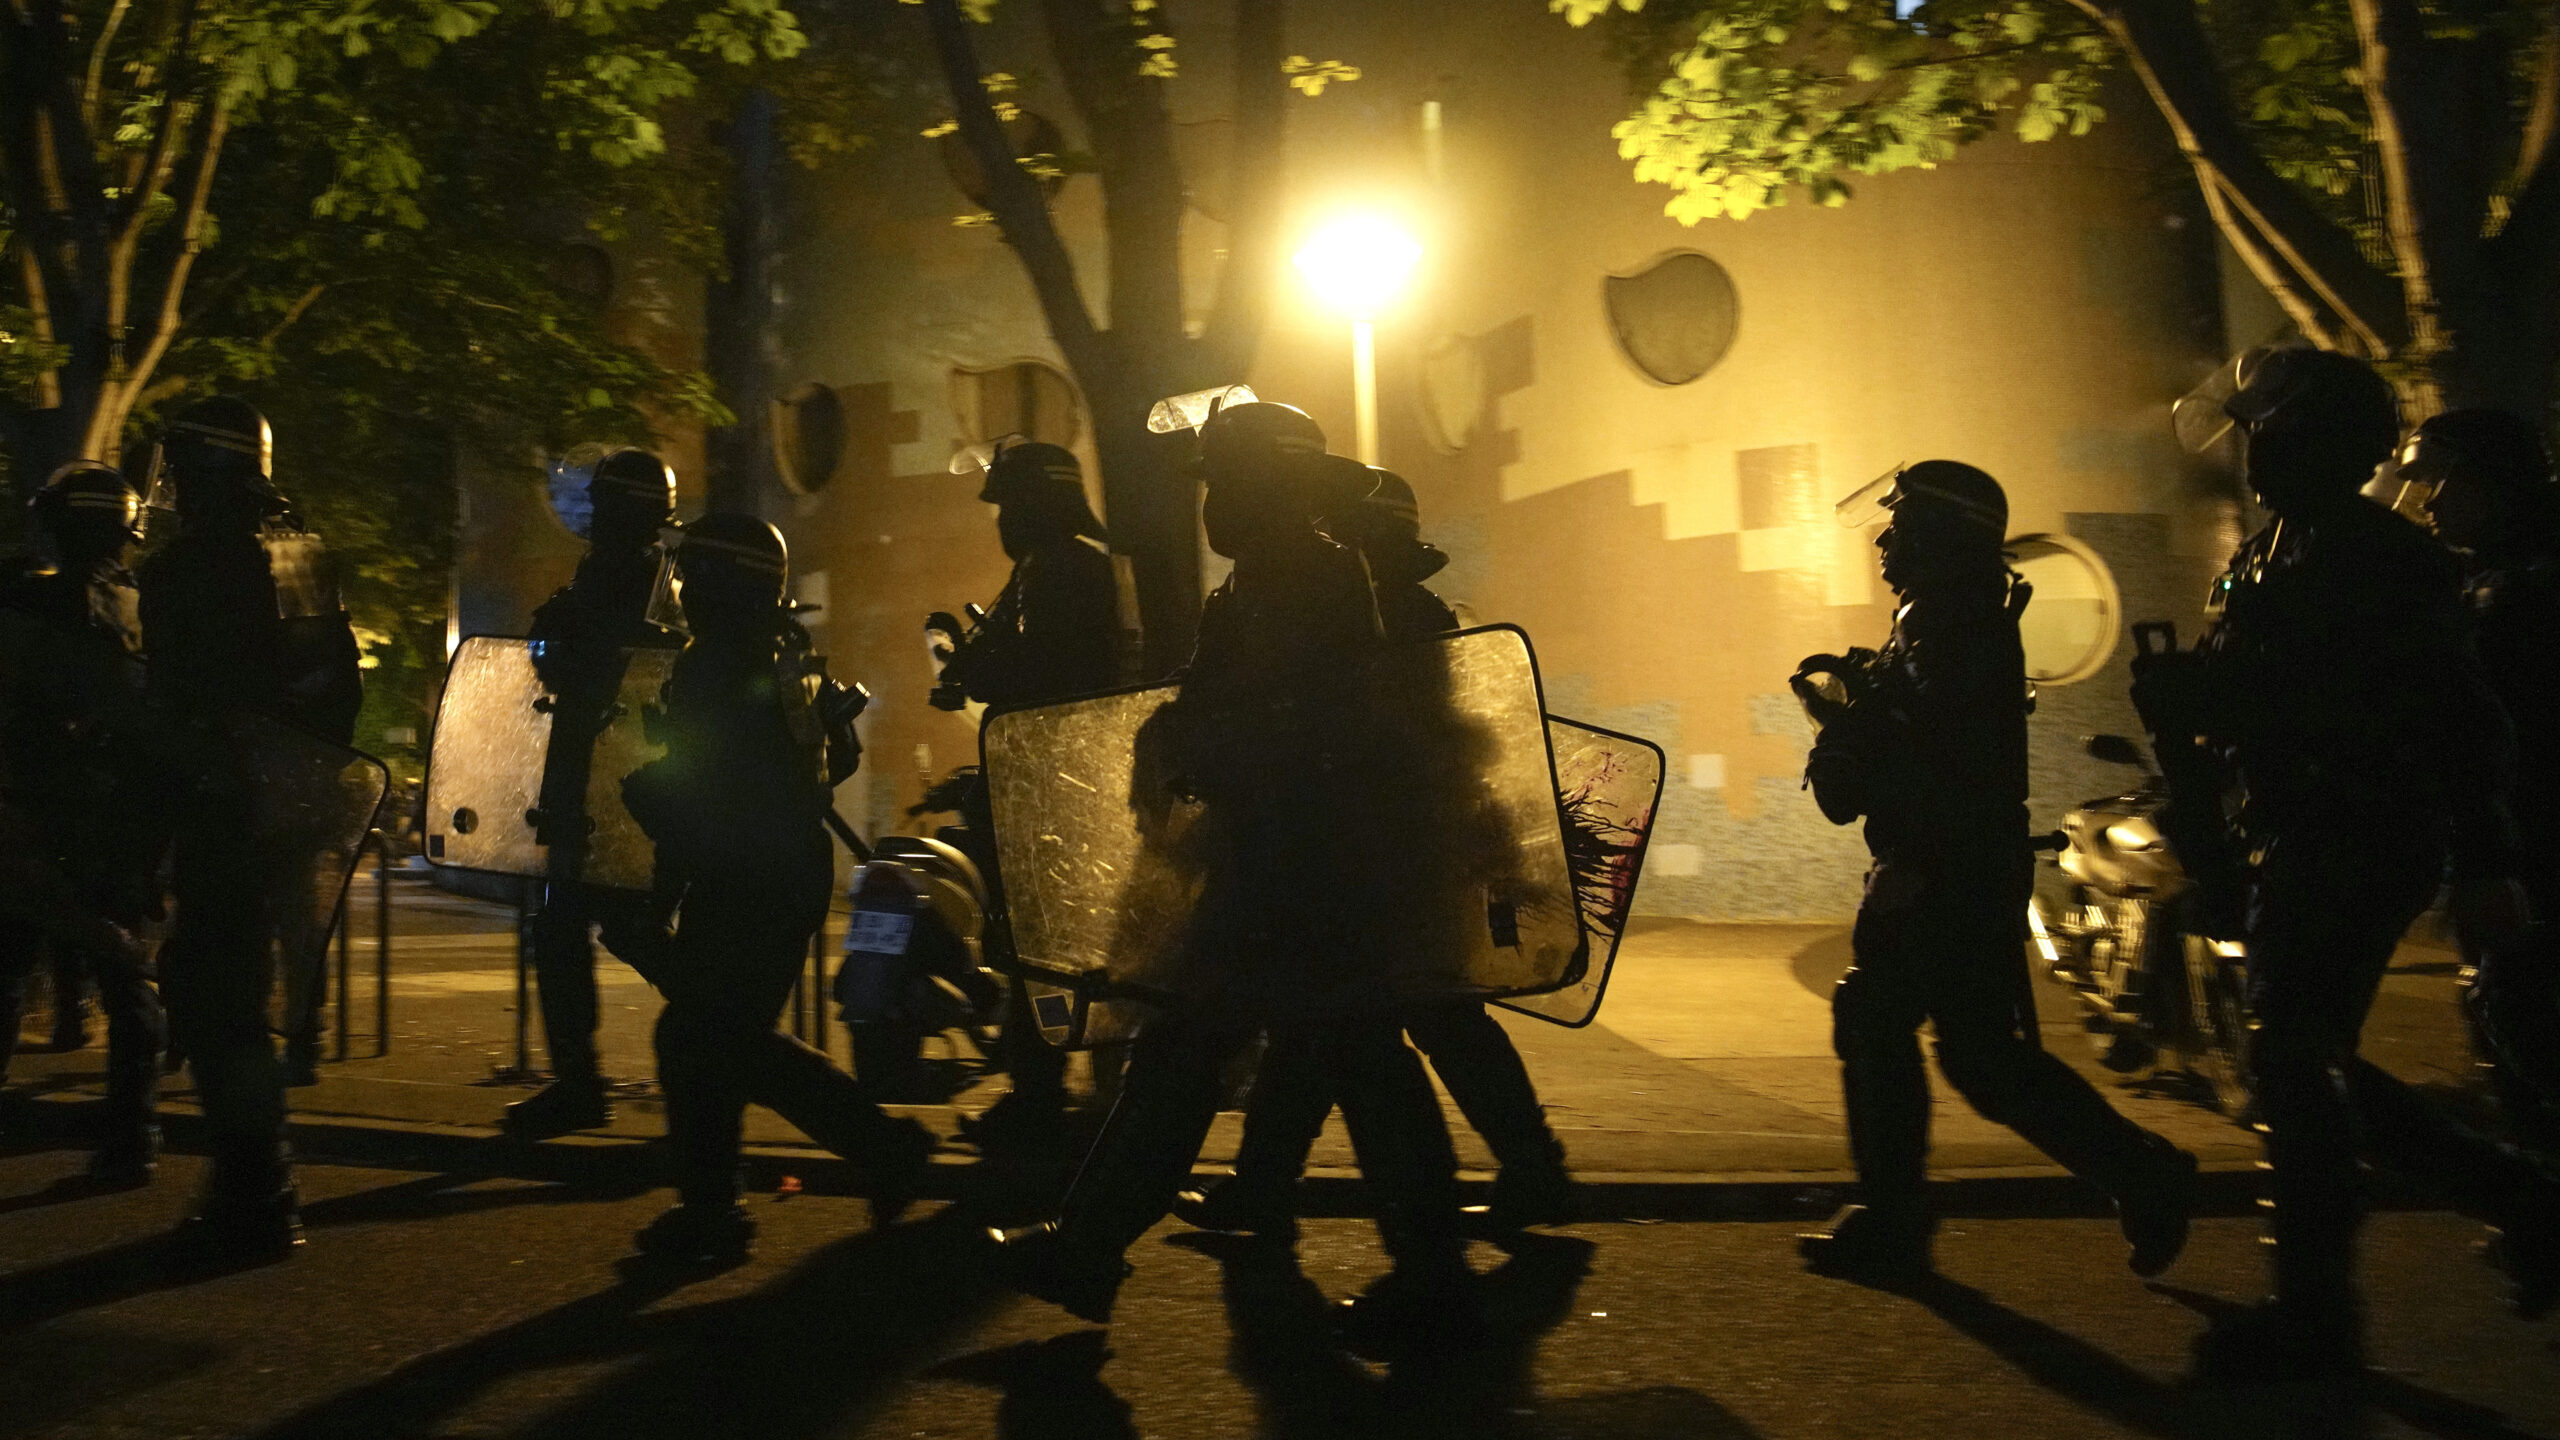 NANTERRE, France (AP) — Young rioters clashed with police and looted stores overnight Friday in a...